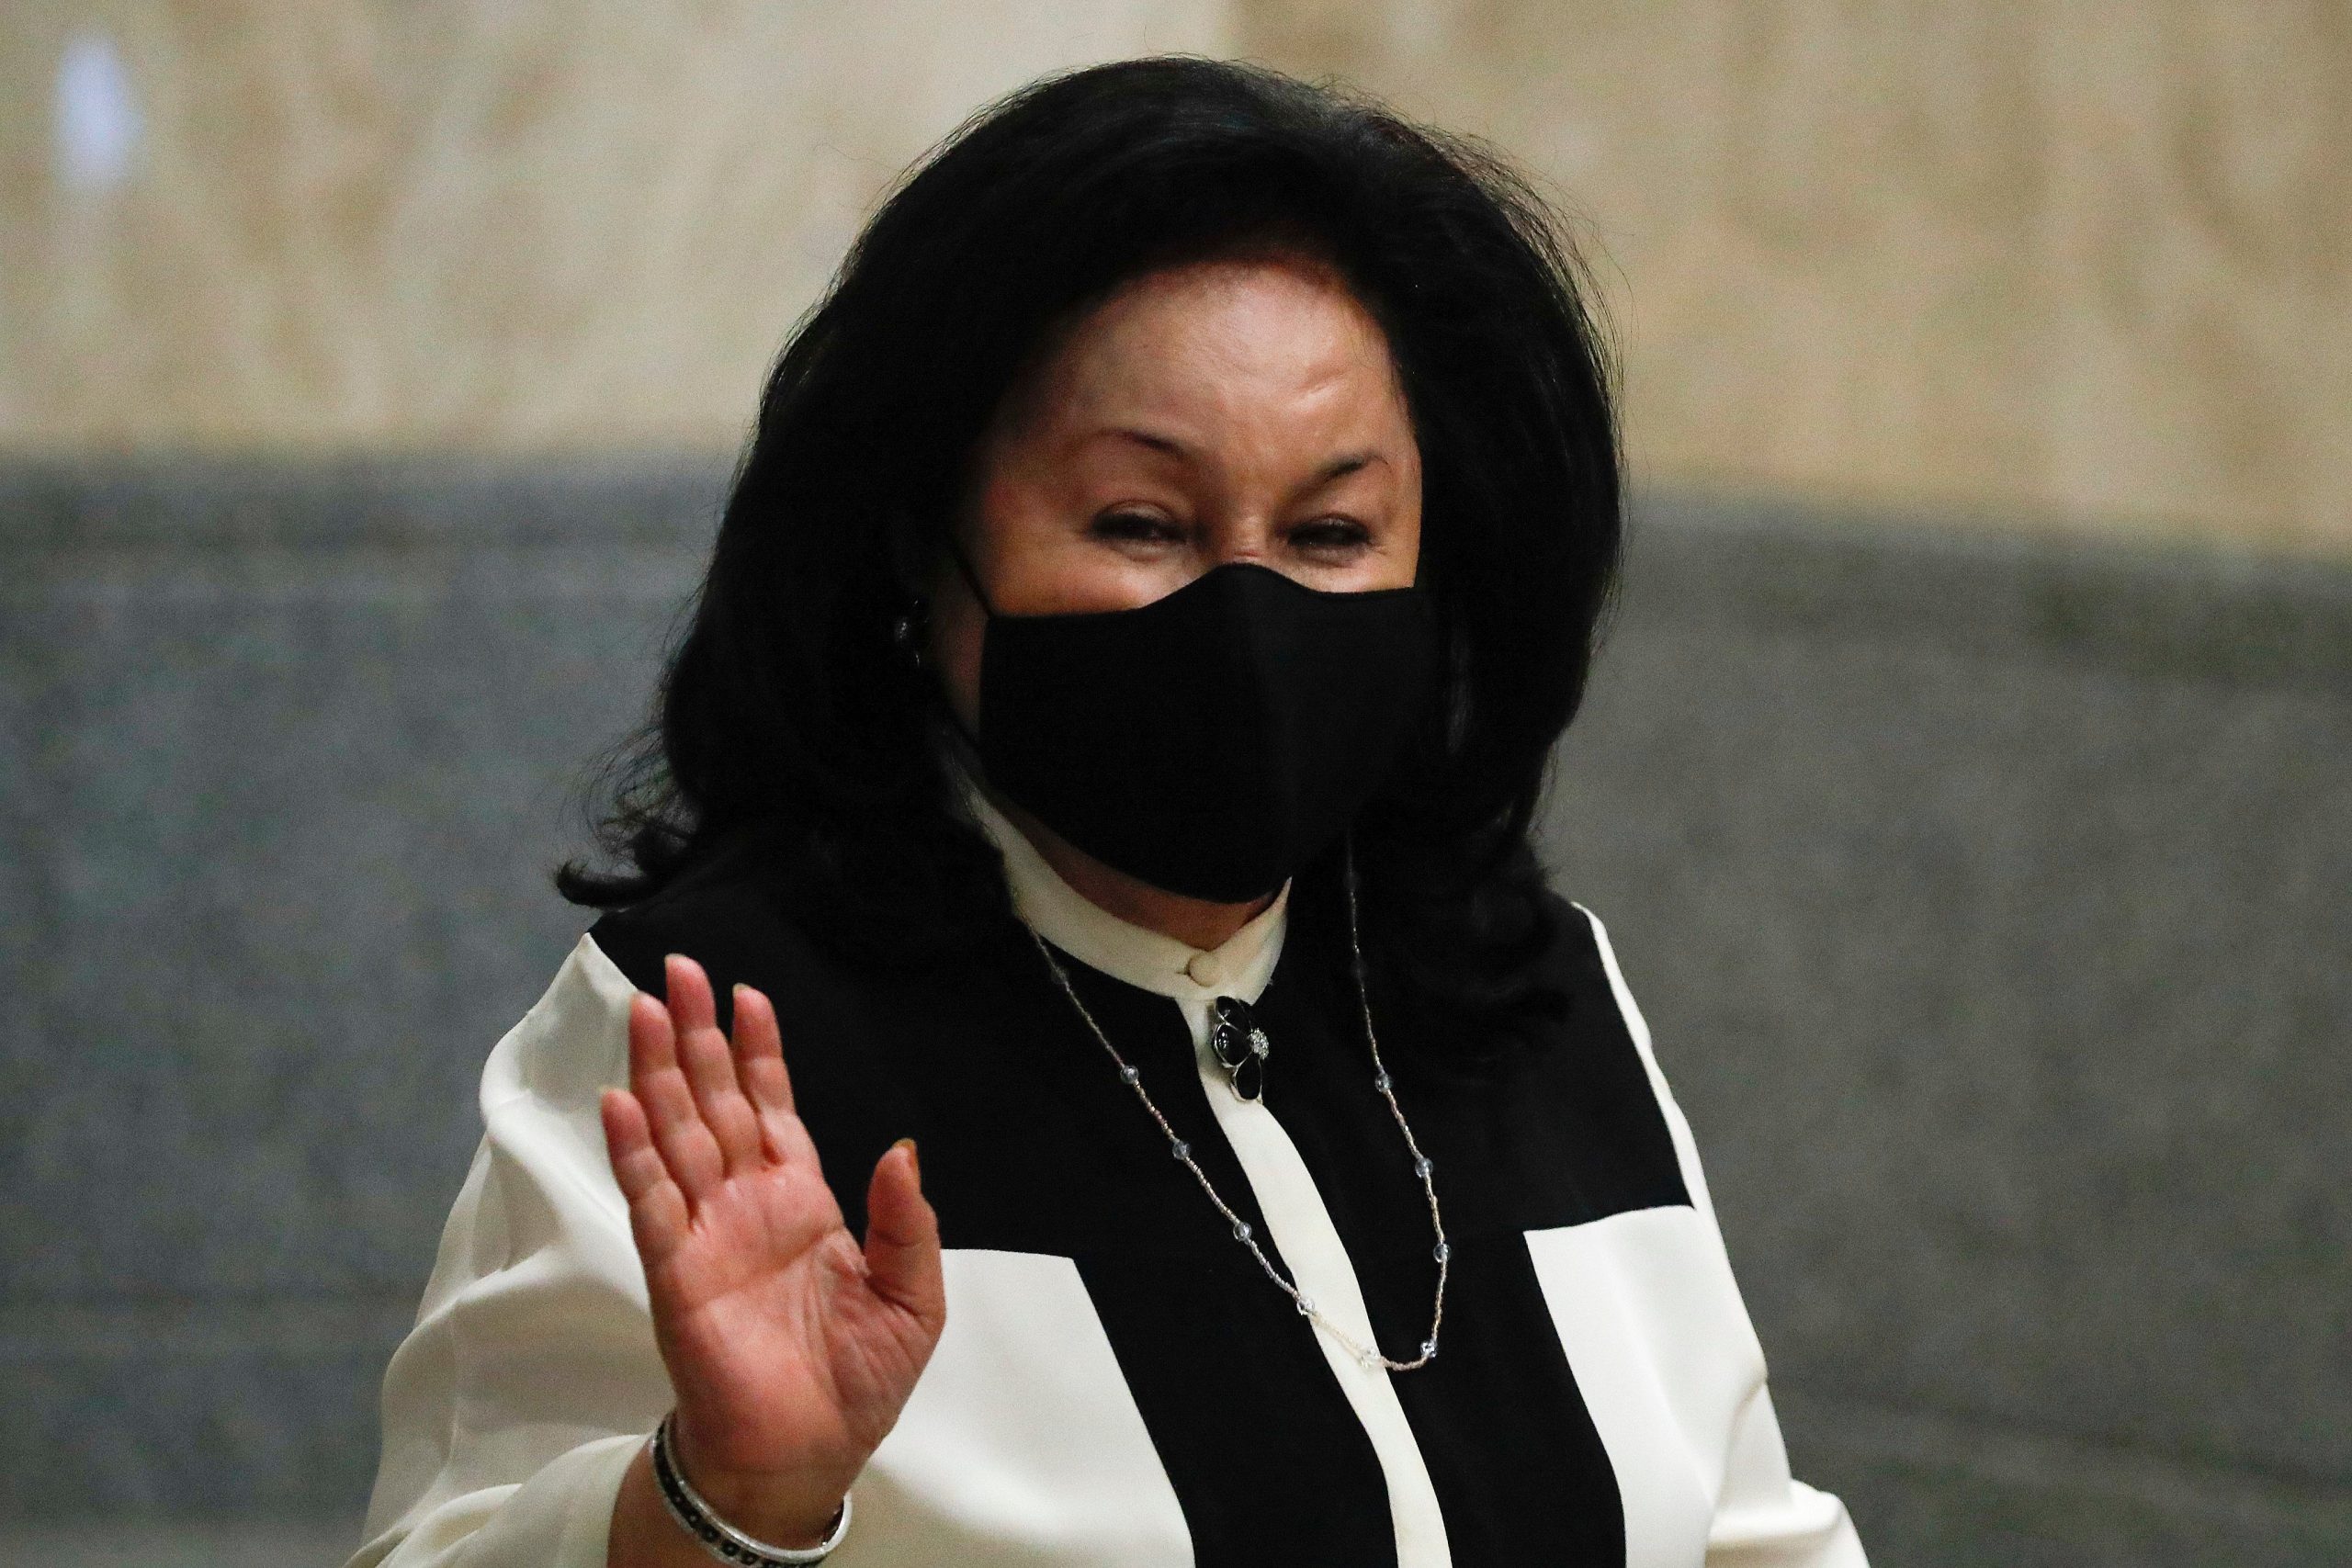 Documents concerning Rosmah's judgement were allegedly leaked ahead of her verdict announcement. Image credit: SCMP